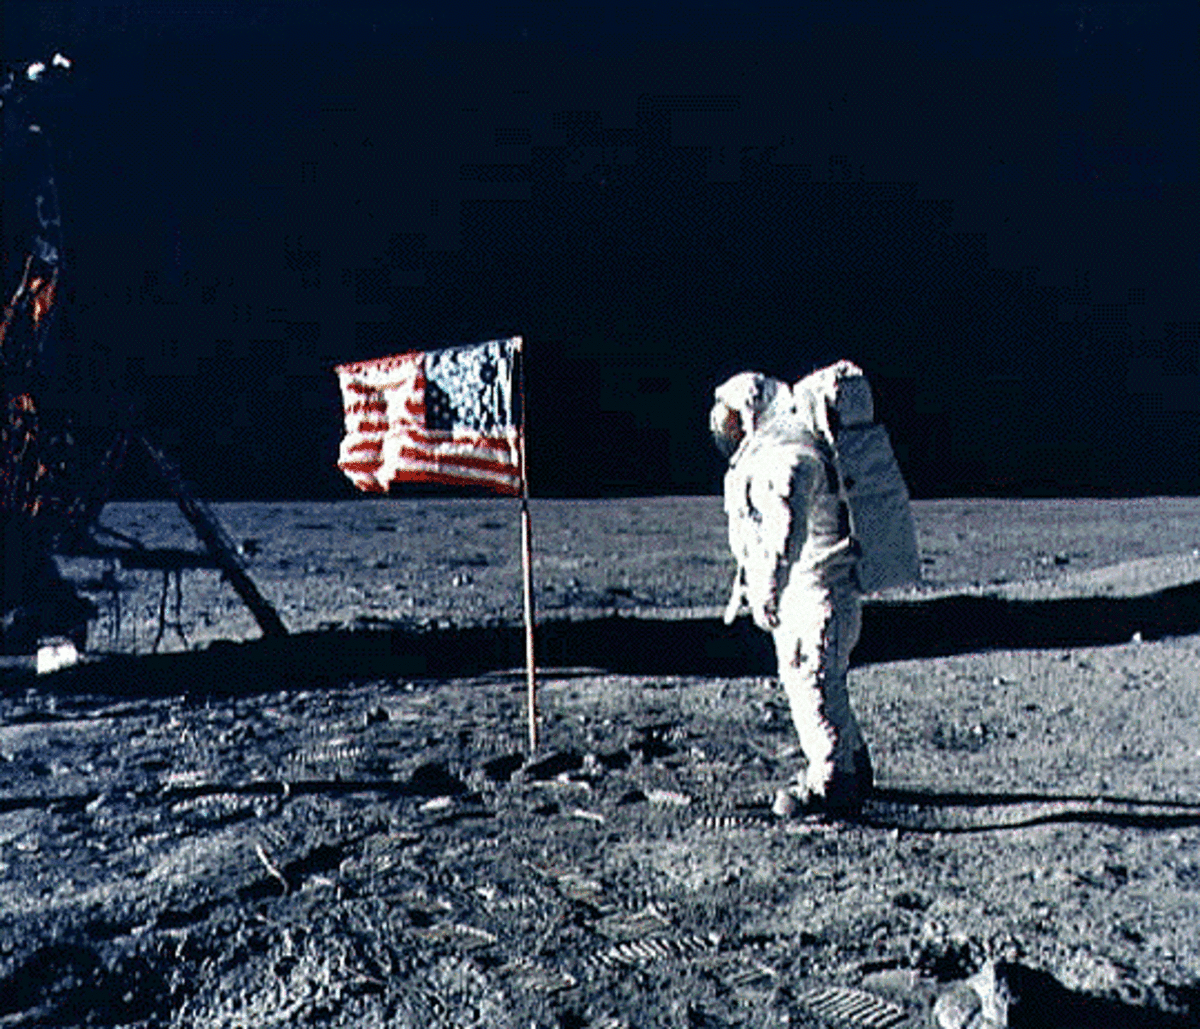 AMERICAN FLAG PLANTED ON THE MOON